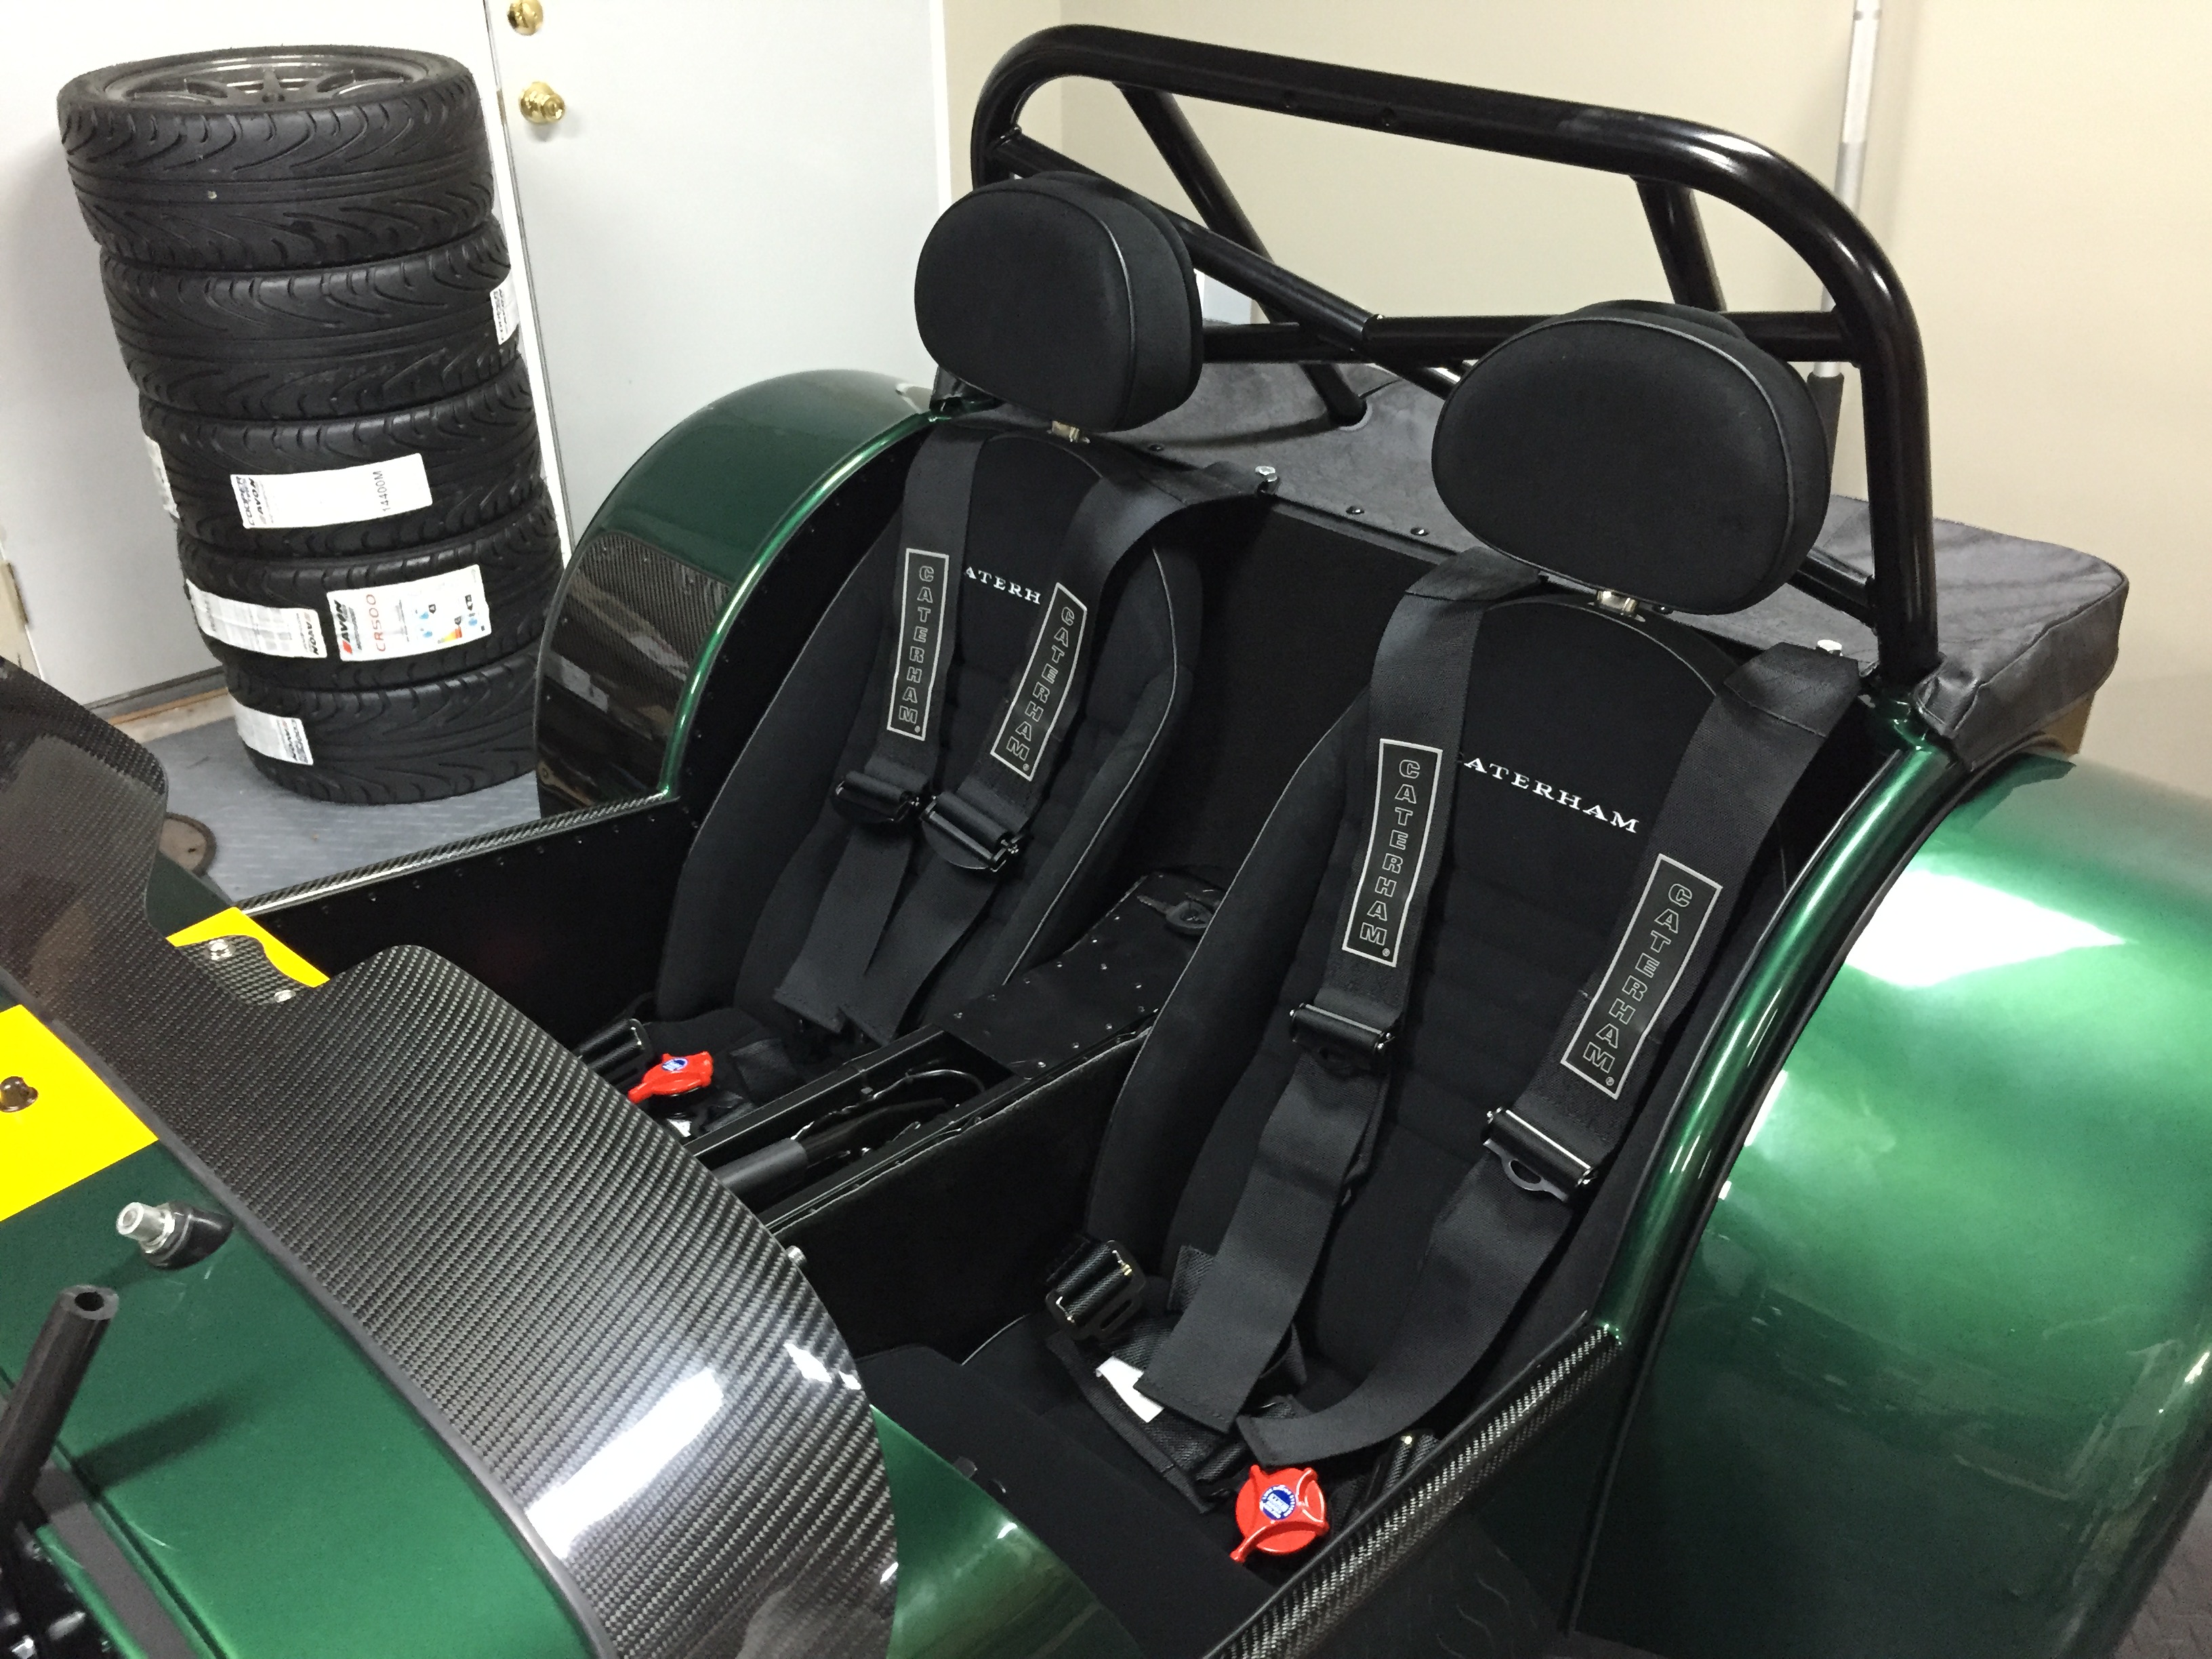 Seats and harnesses in